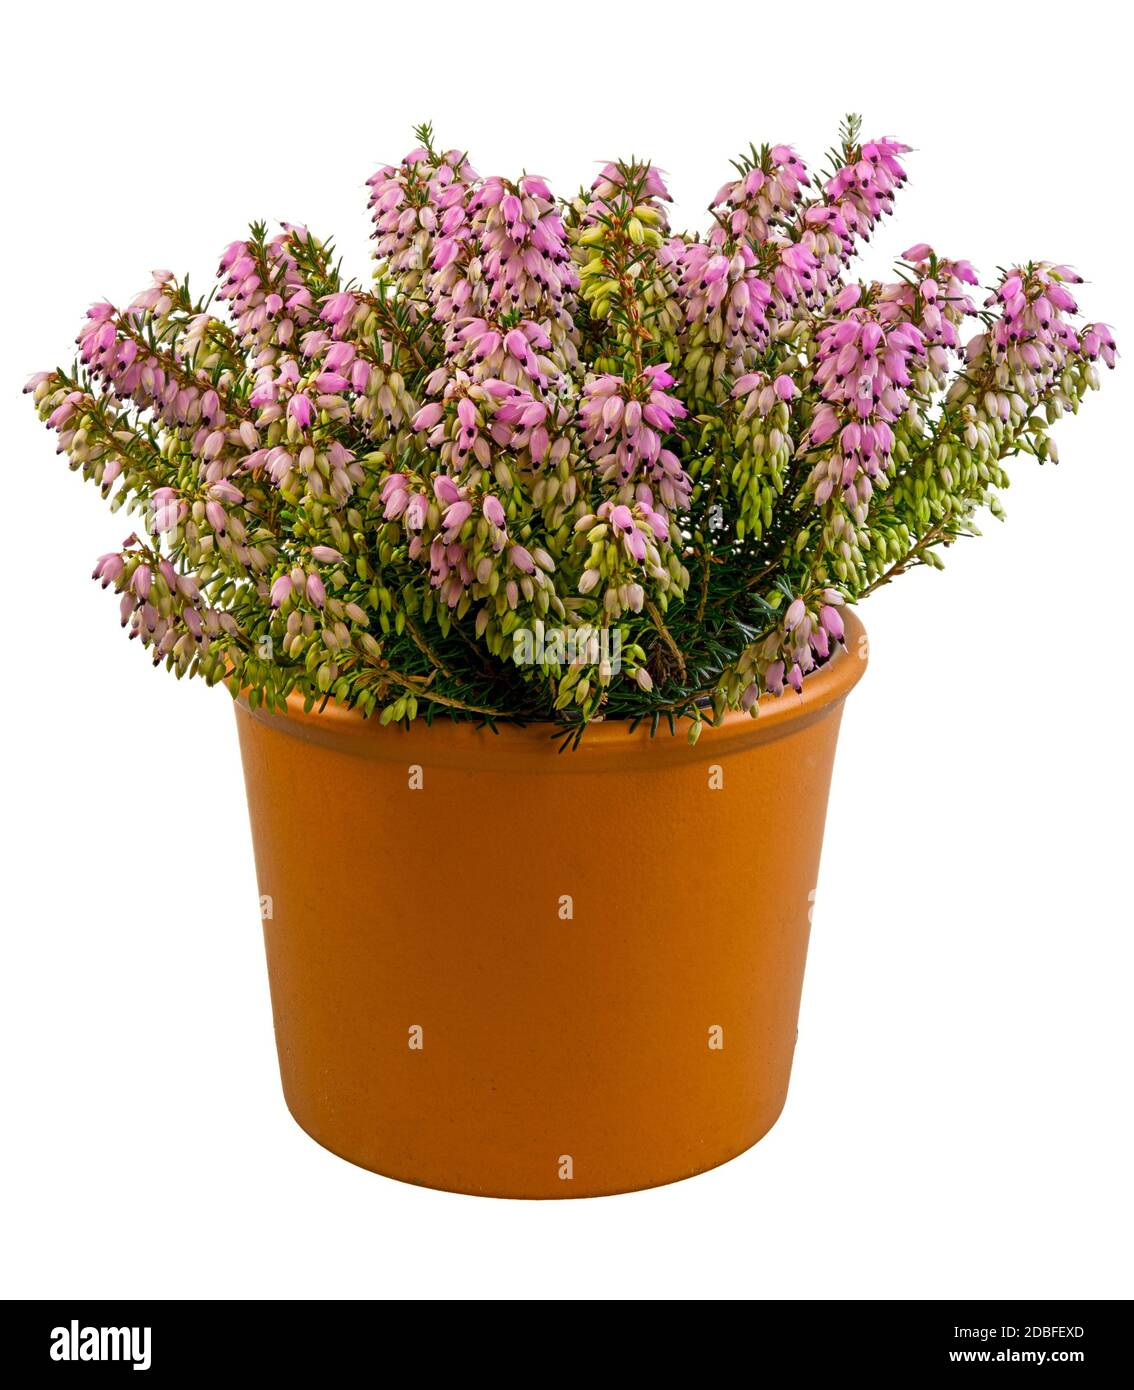 Isolated potted winter-flowering heather plant (erica carnea) Stock Photo